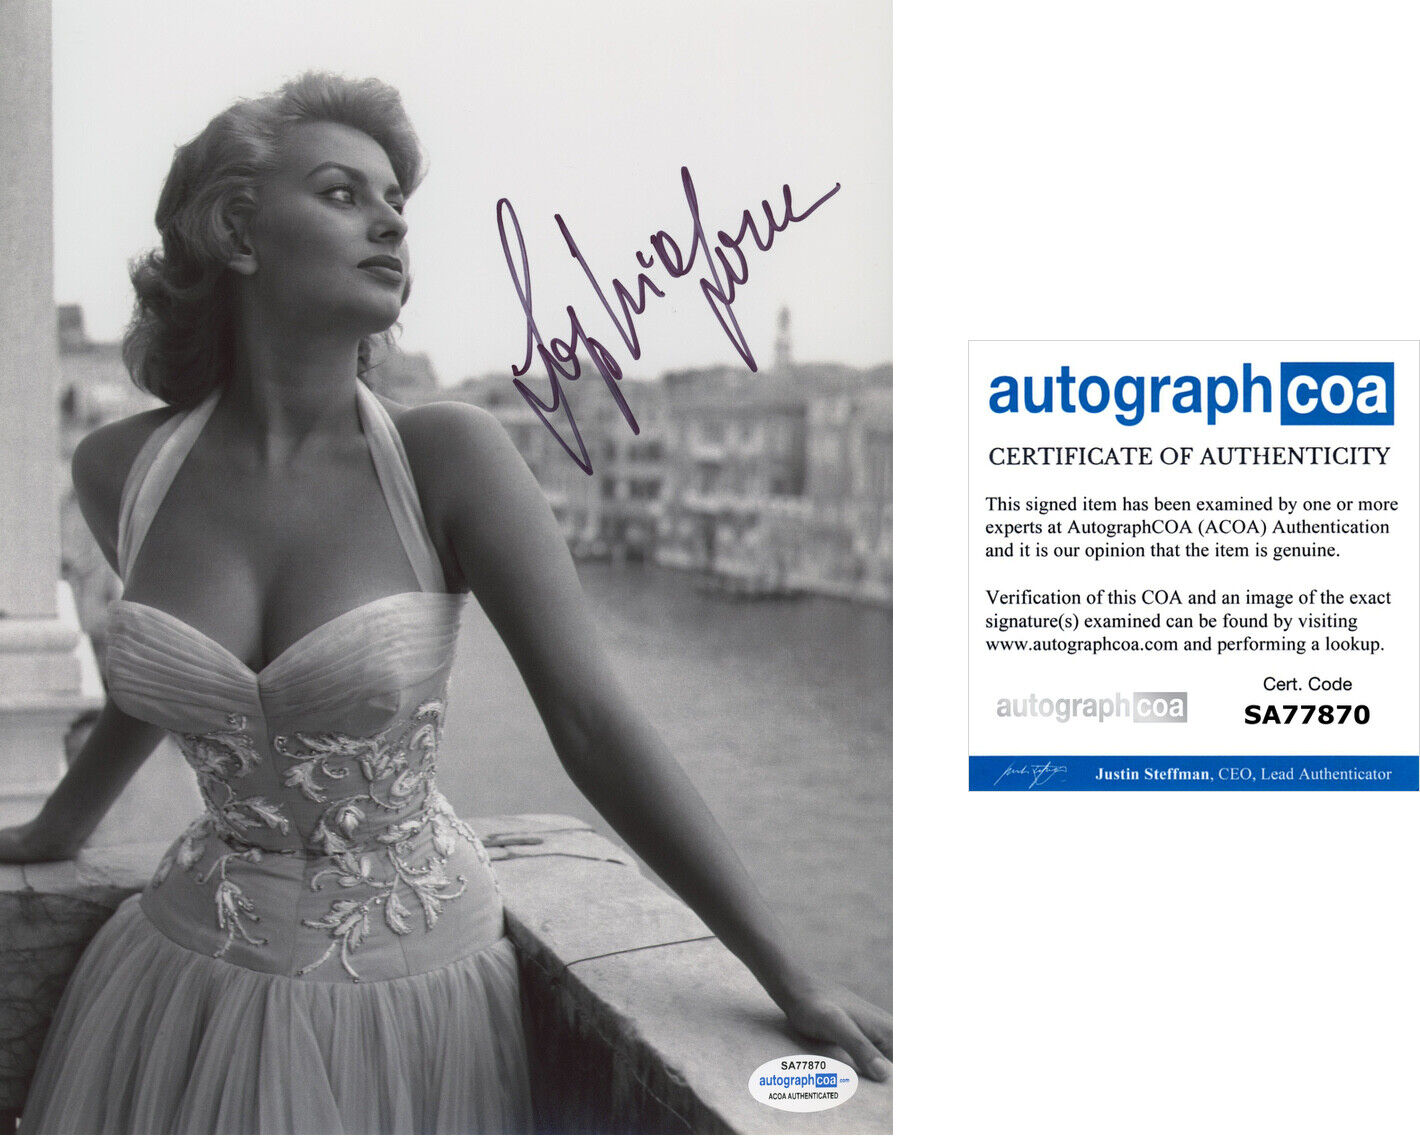 SOPHIA LOREN signed Autographed 8X10 Photo Poster painting d TWO WOMEN Hot SEXY Actress ACOA COA